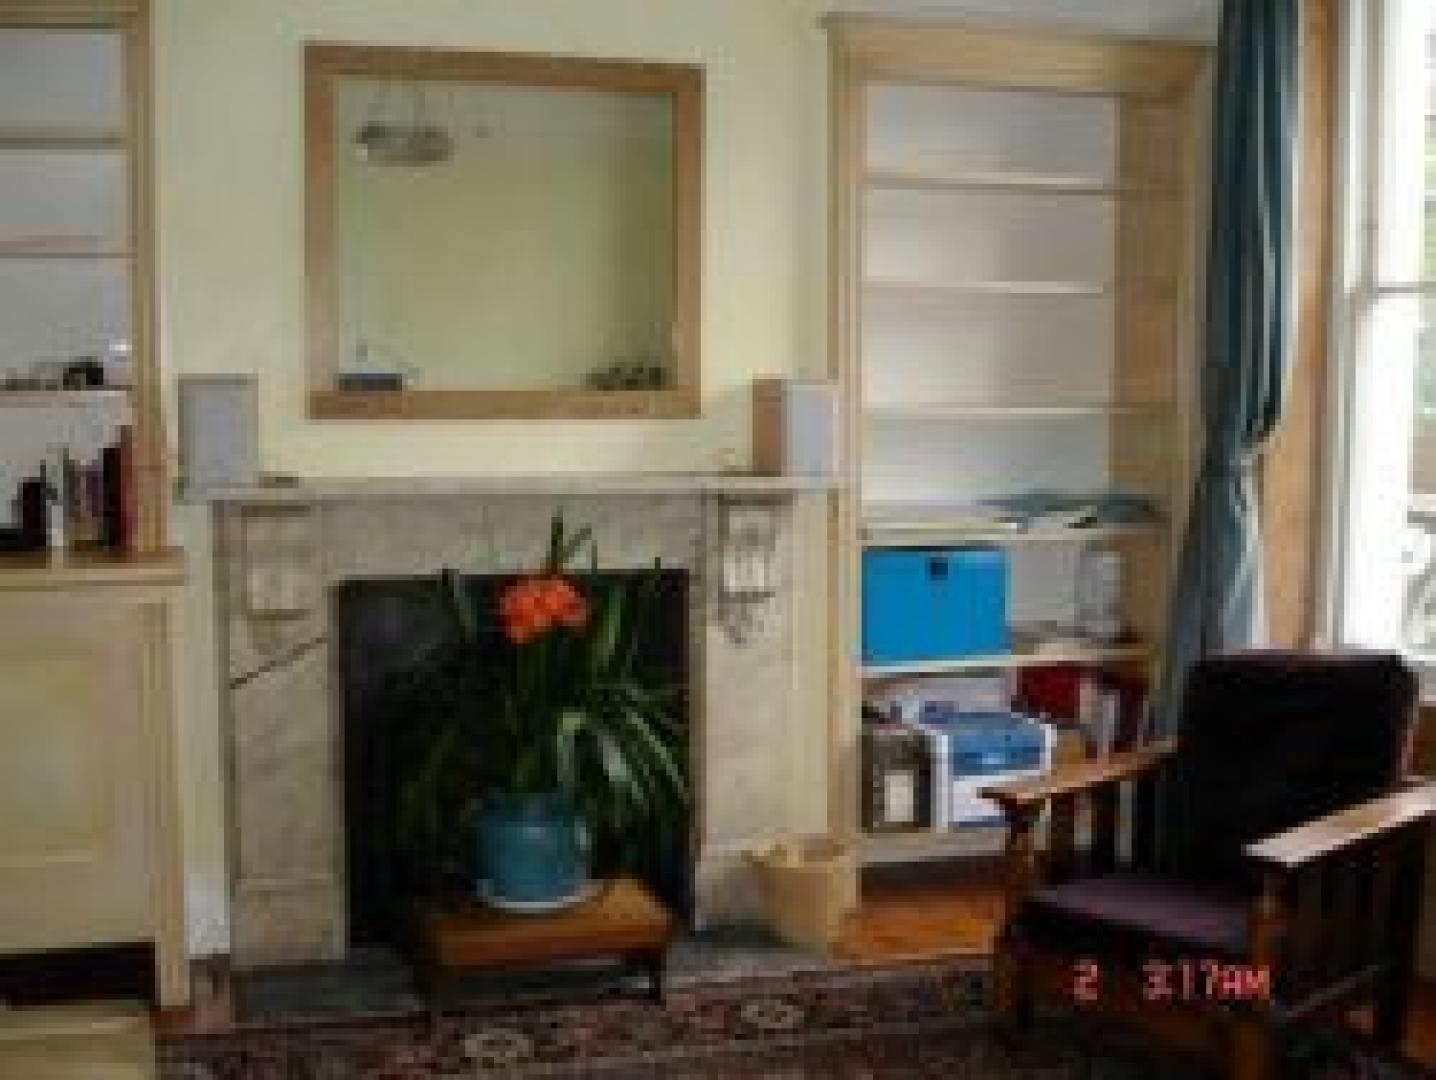 			This is a must see property!, 2 Bedroom, 1 bath, 1 reception Flat			 Moray road, Stroud green